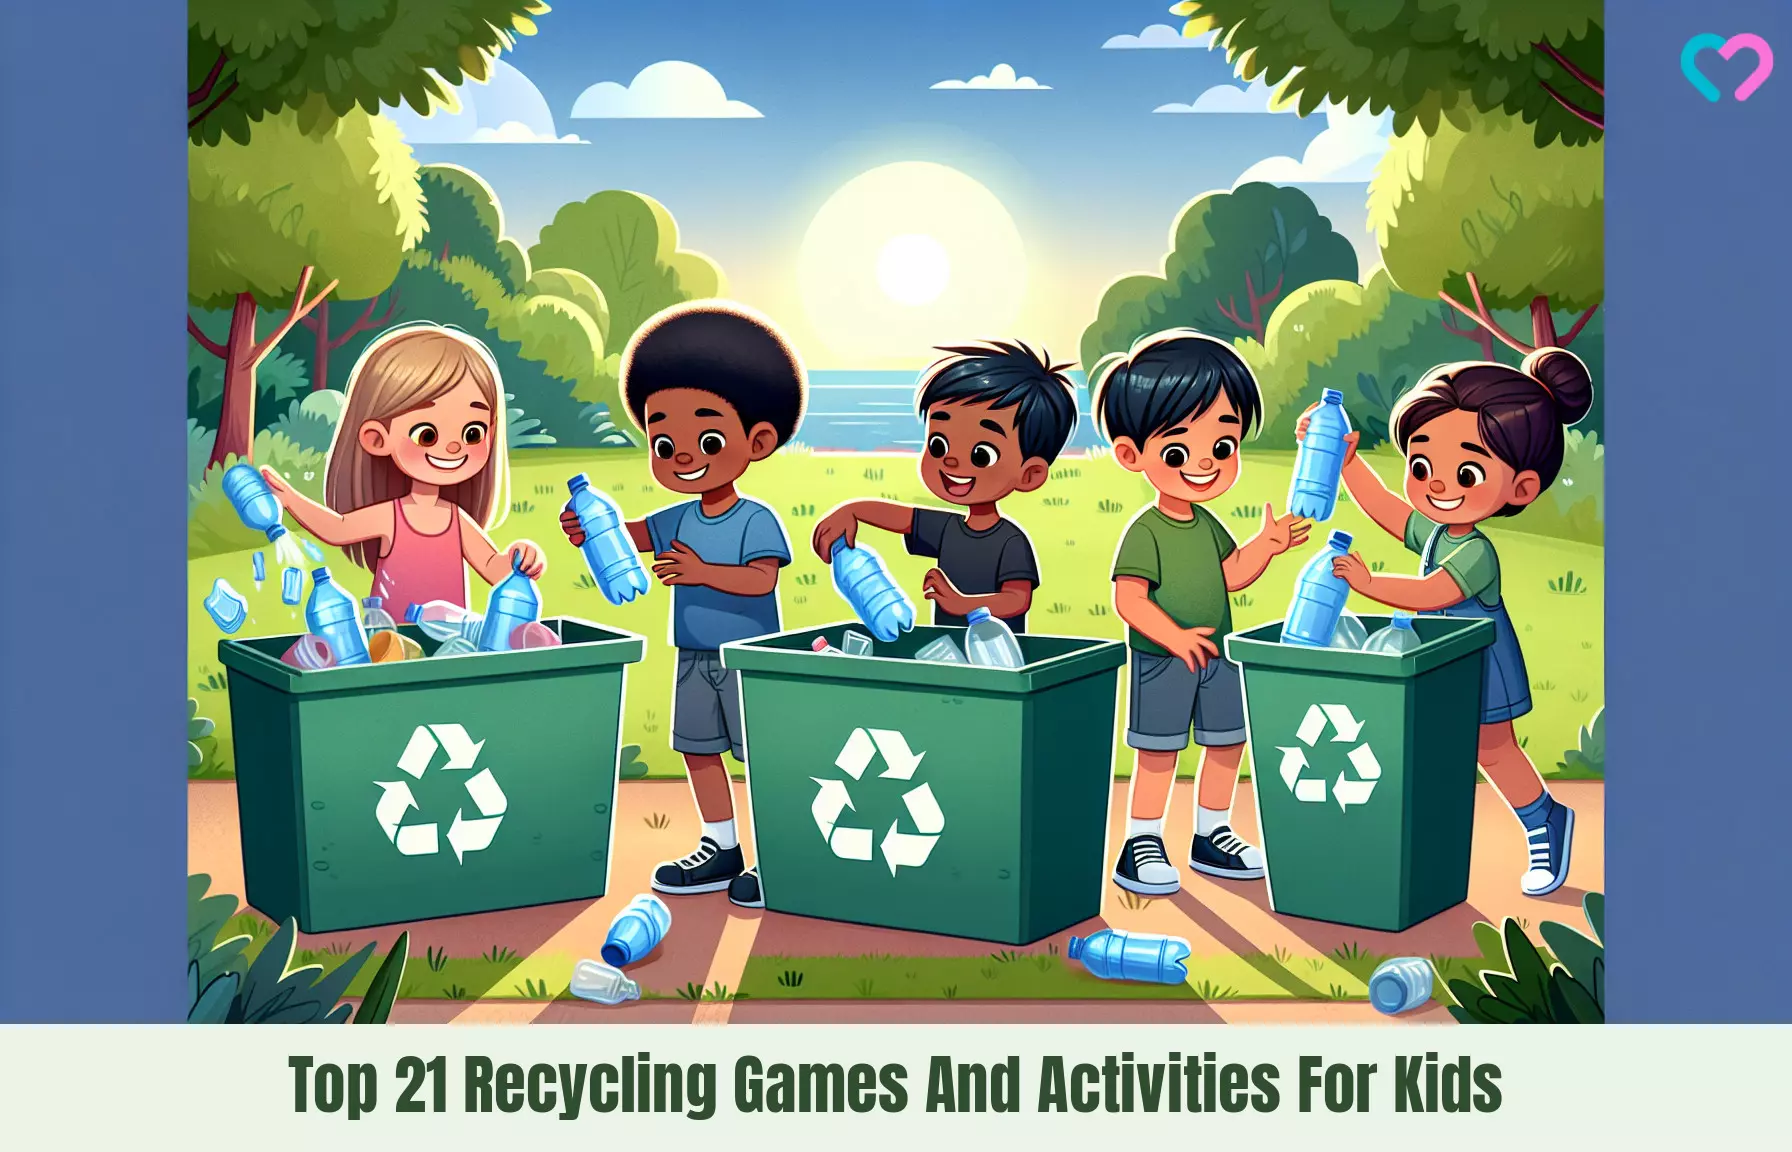 Recycling Games And Activities For Kids_illustration